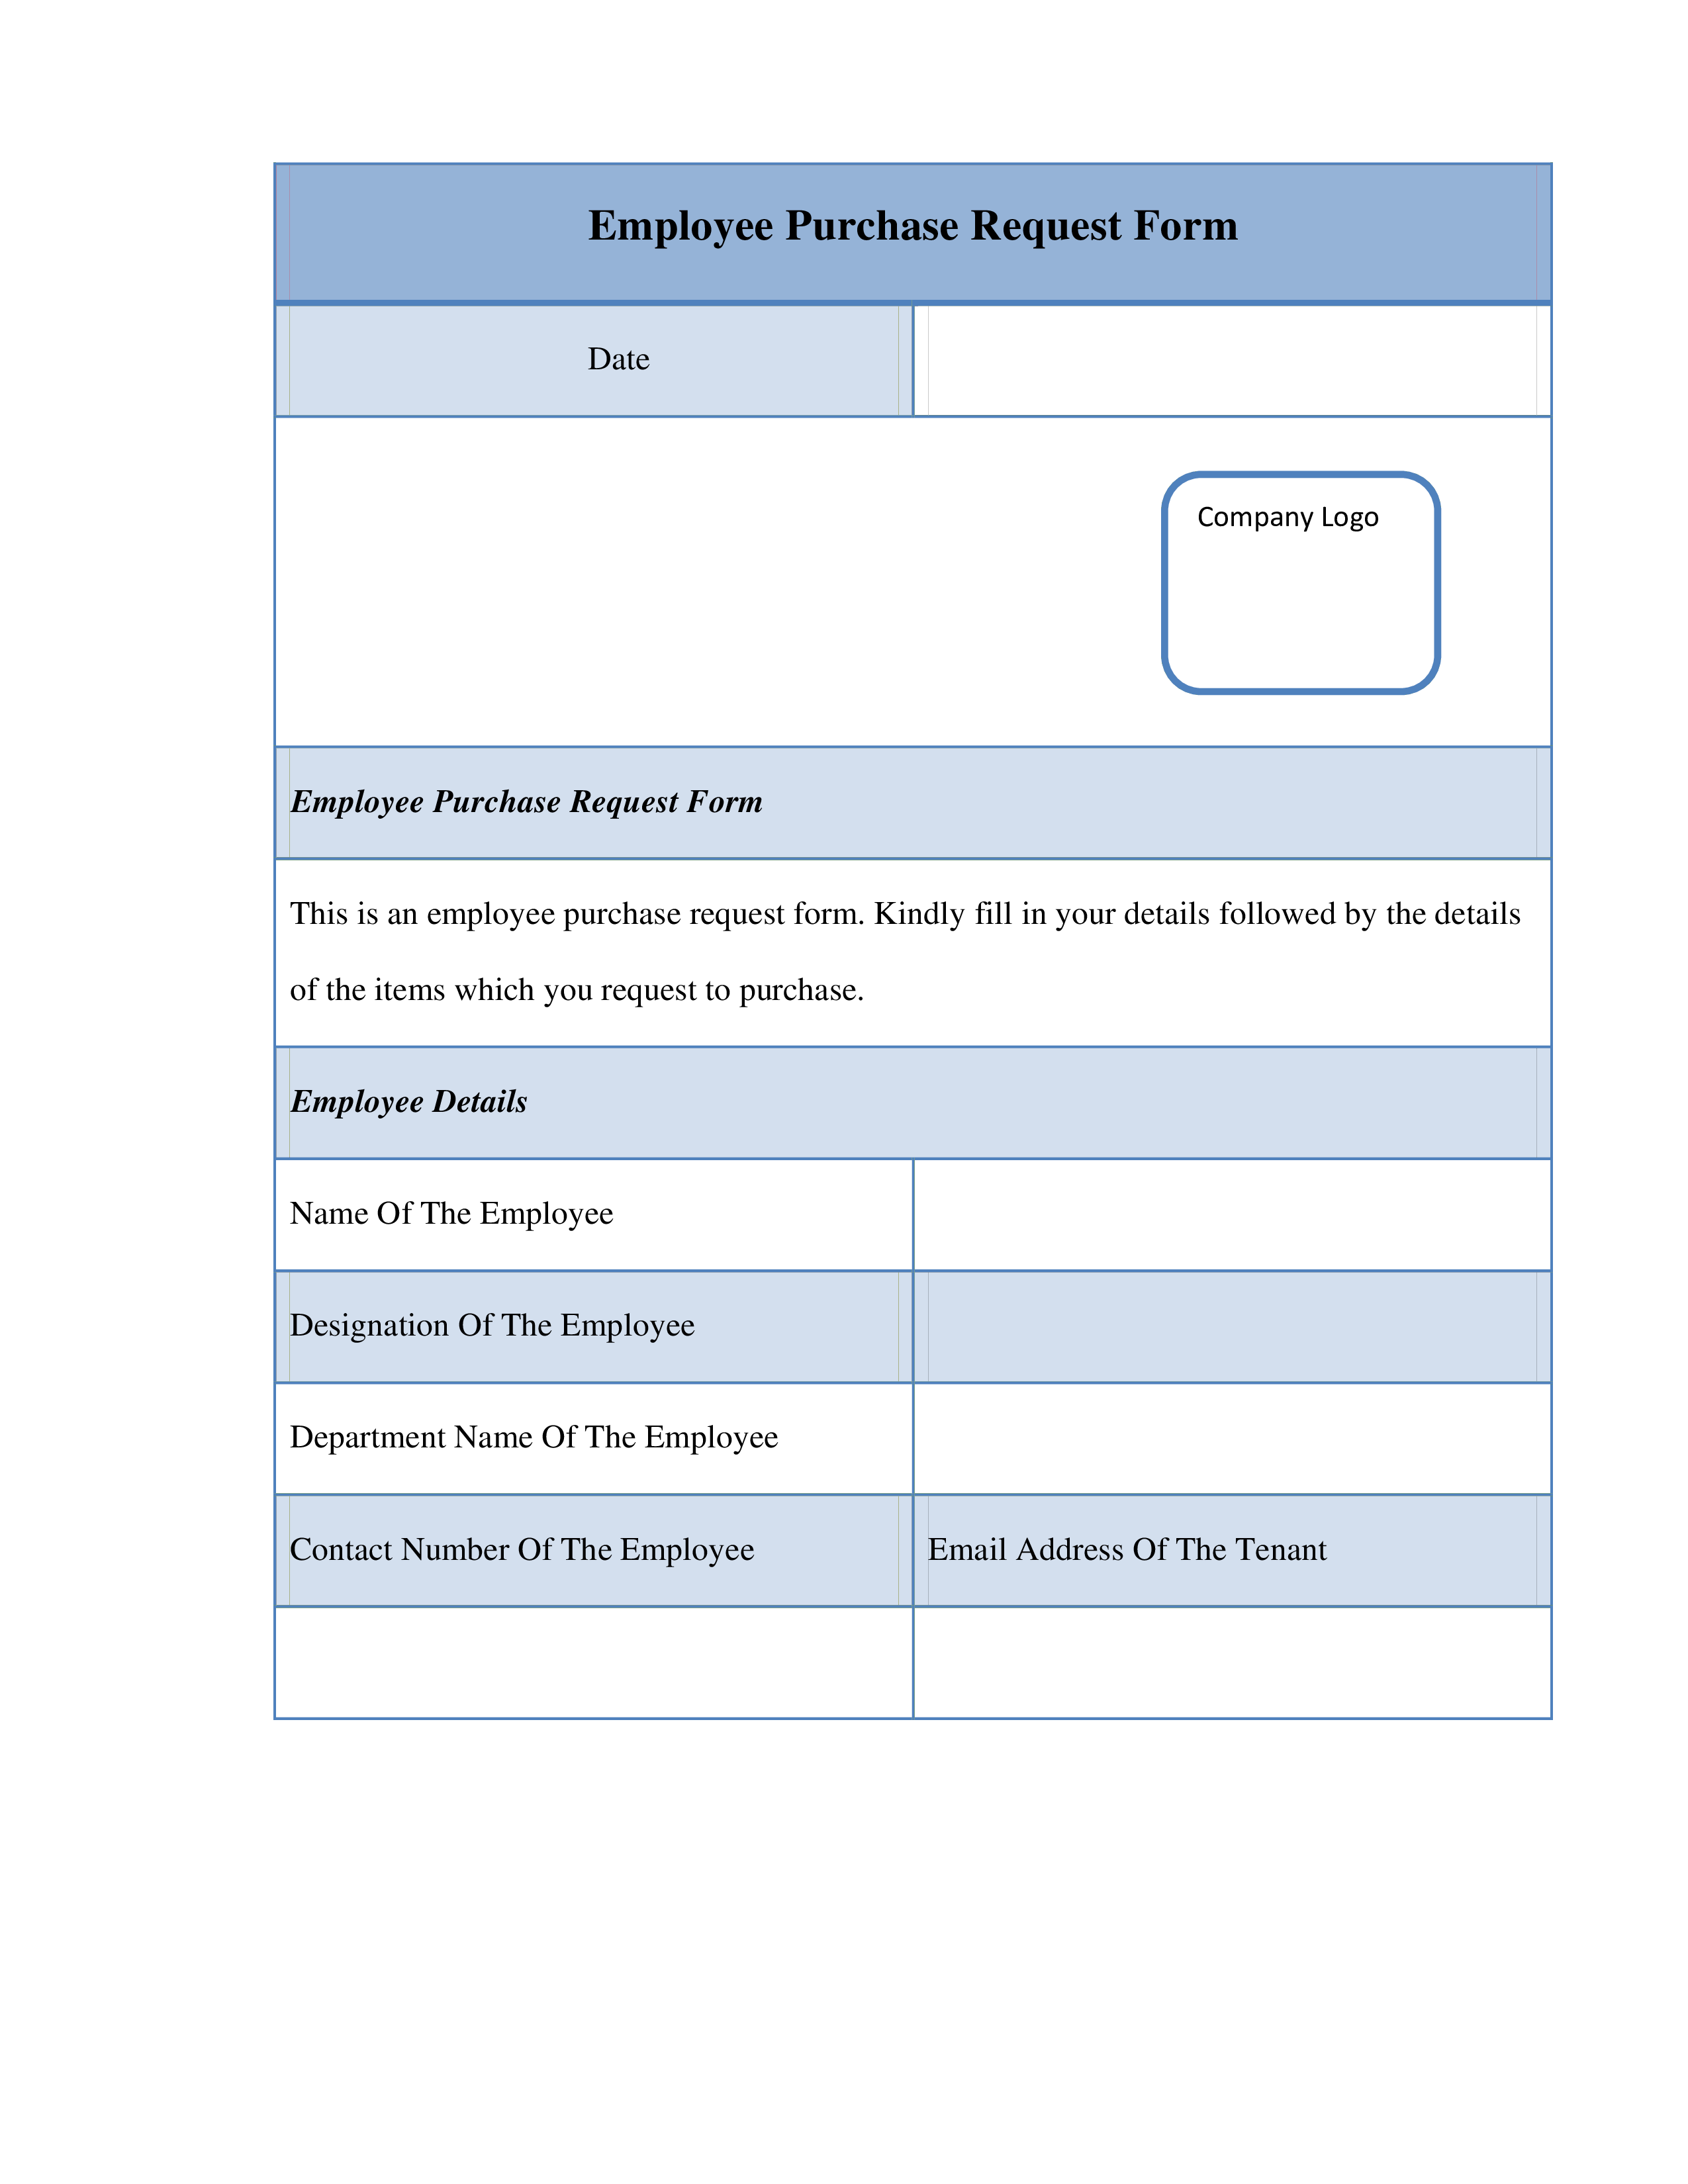 Employee Purchase Request Form main image